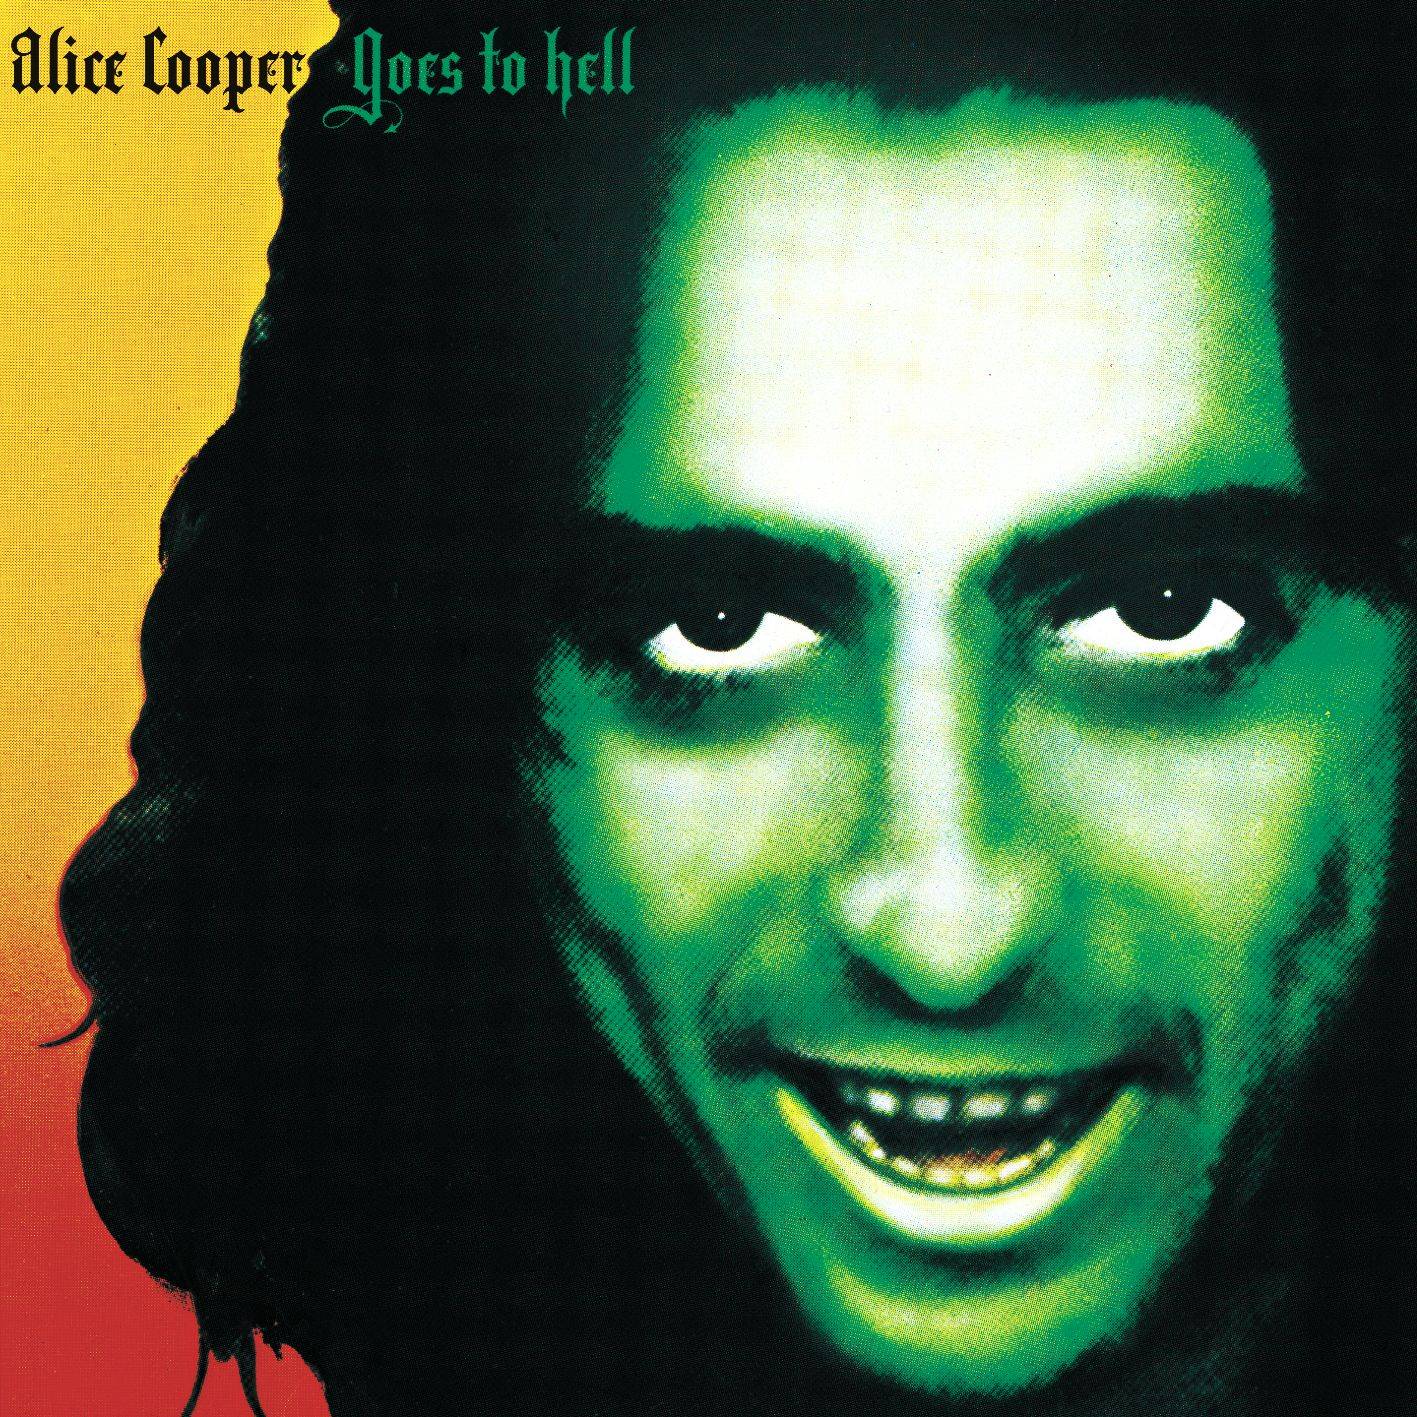 ALICE COOPER Alice Cooper Goes To Hell reviews